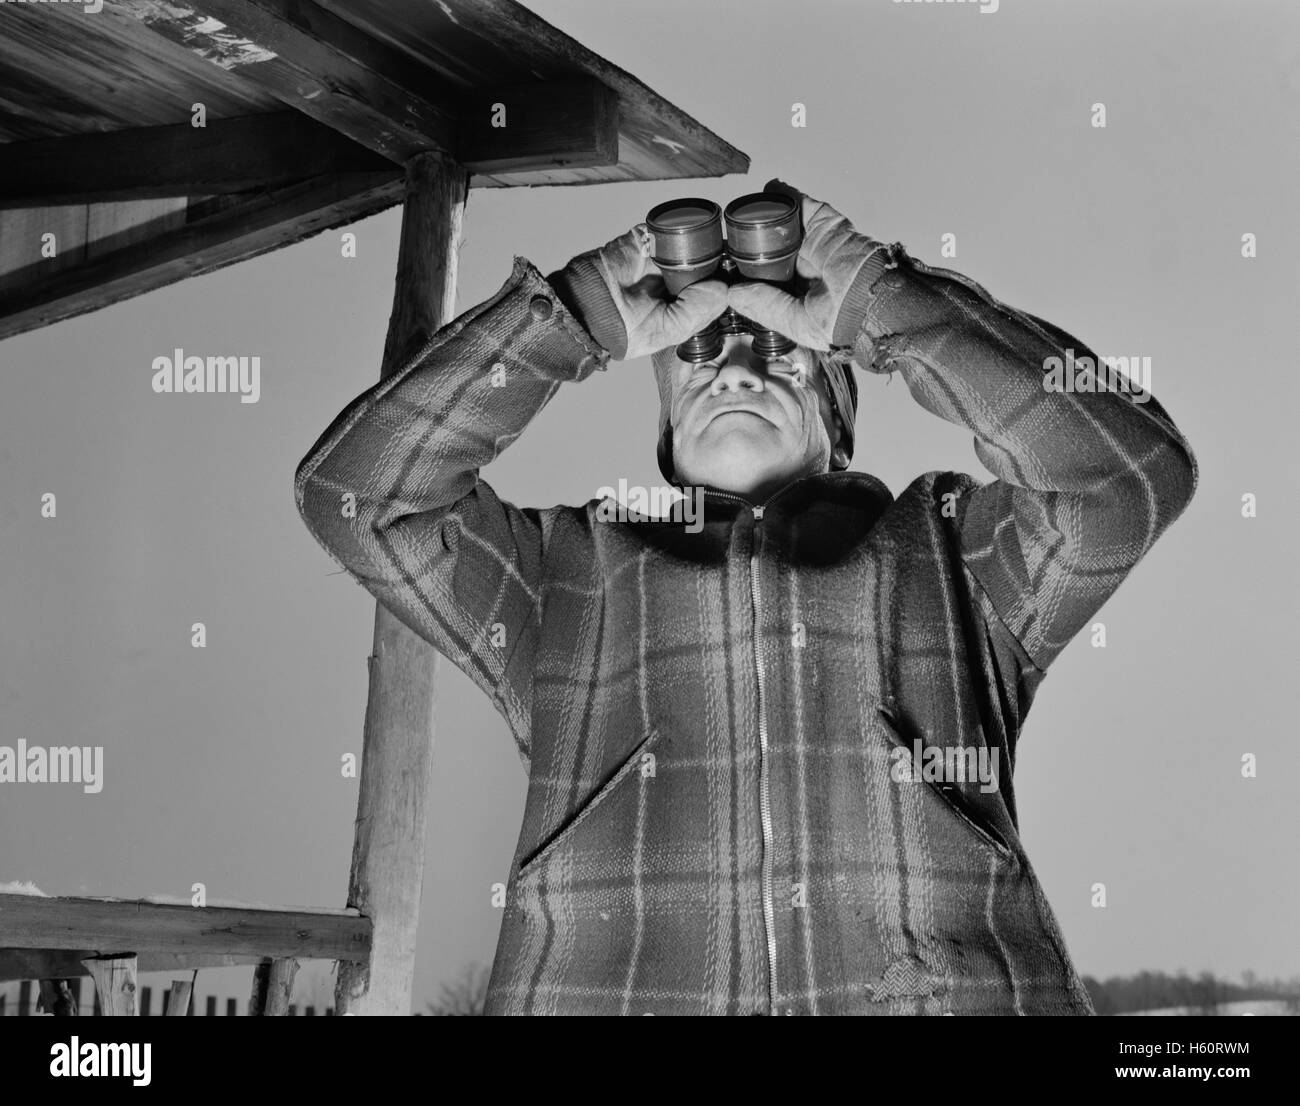 Man Looking Through Binoculars, Airplane Observation Post, Bantam, Connecticut, USA, Howard R. Hollem for Office of Emergency Management, January 1942 Stock Photo